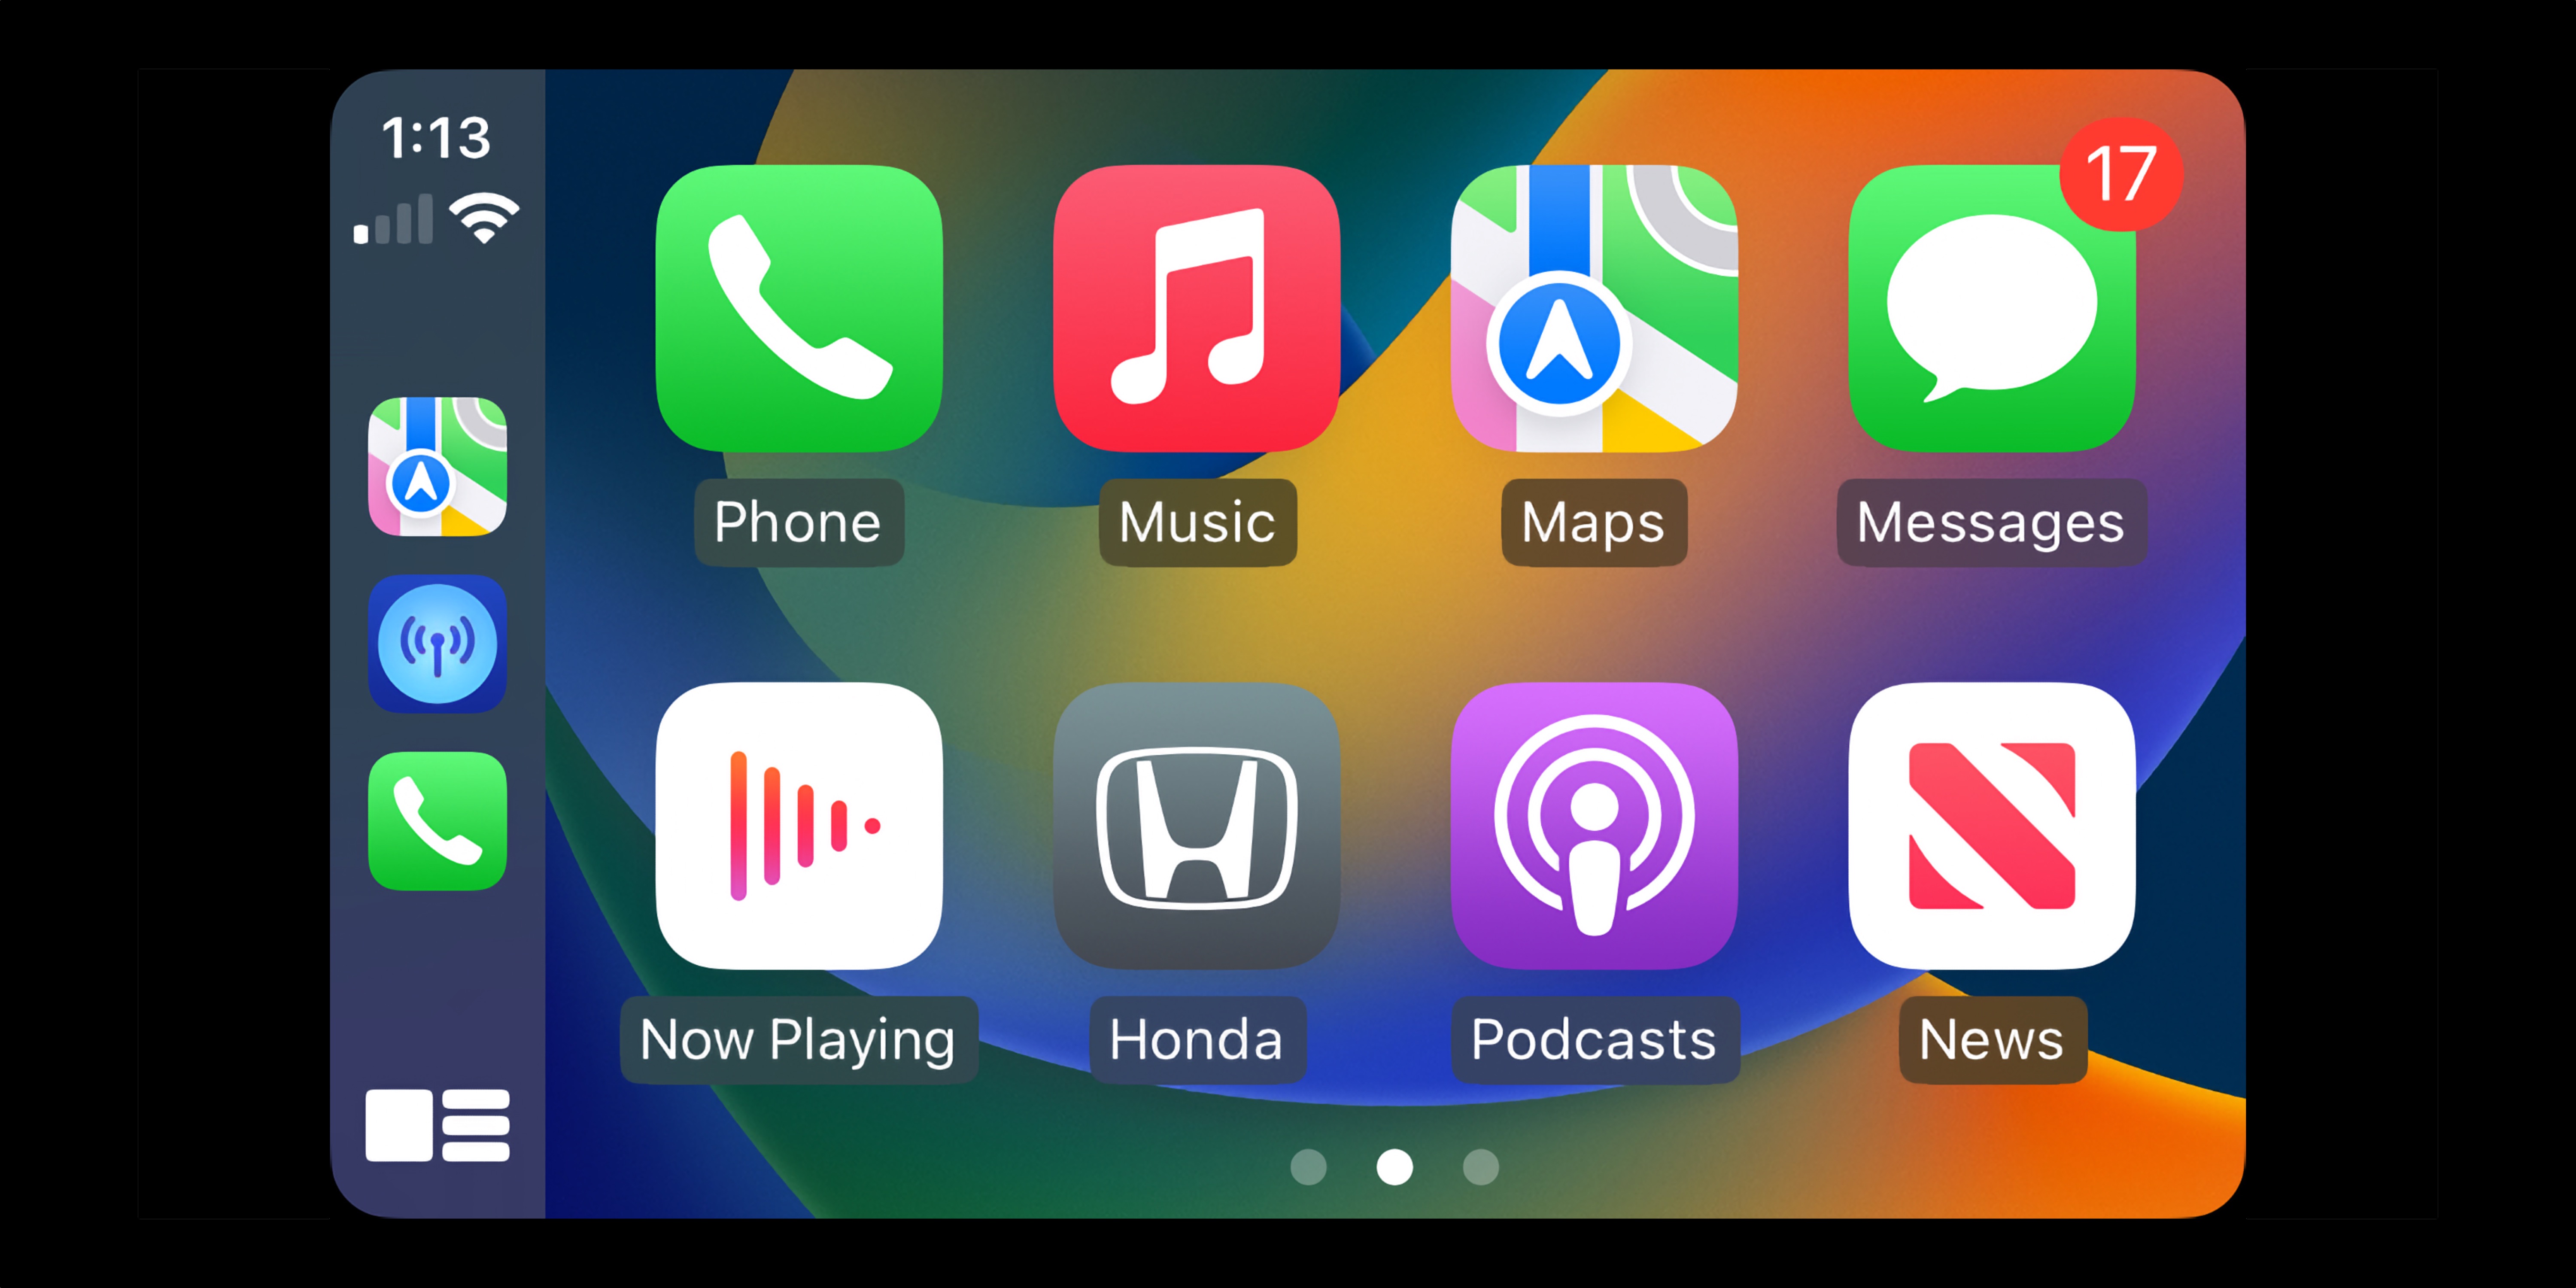 Honda to offer wireless CarPlay retrofit for select cars later